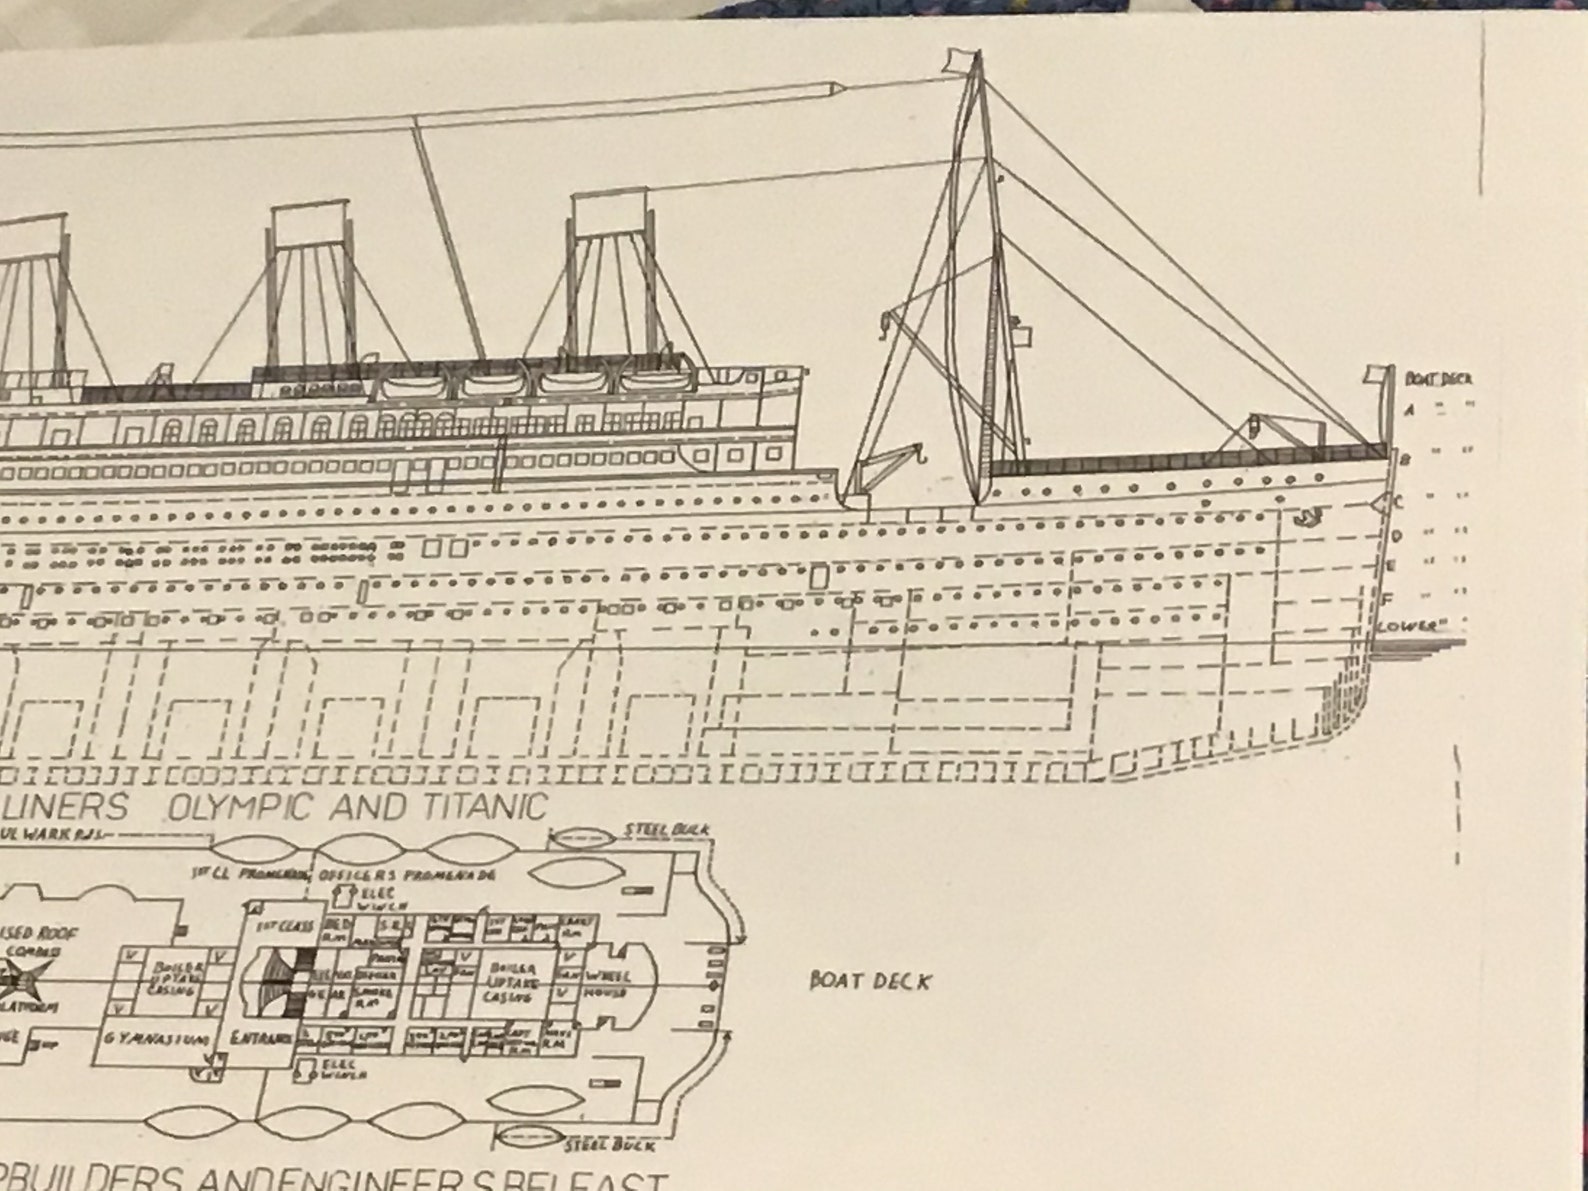 Olympic/Titanic blueprints pen and ink deck plans by hand | Etsy